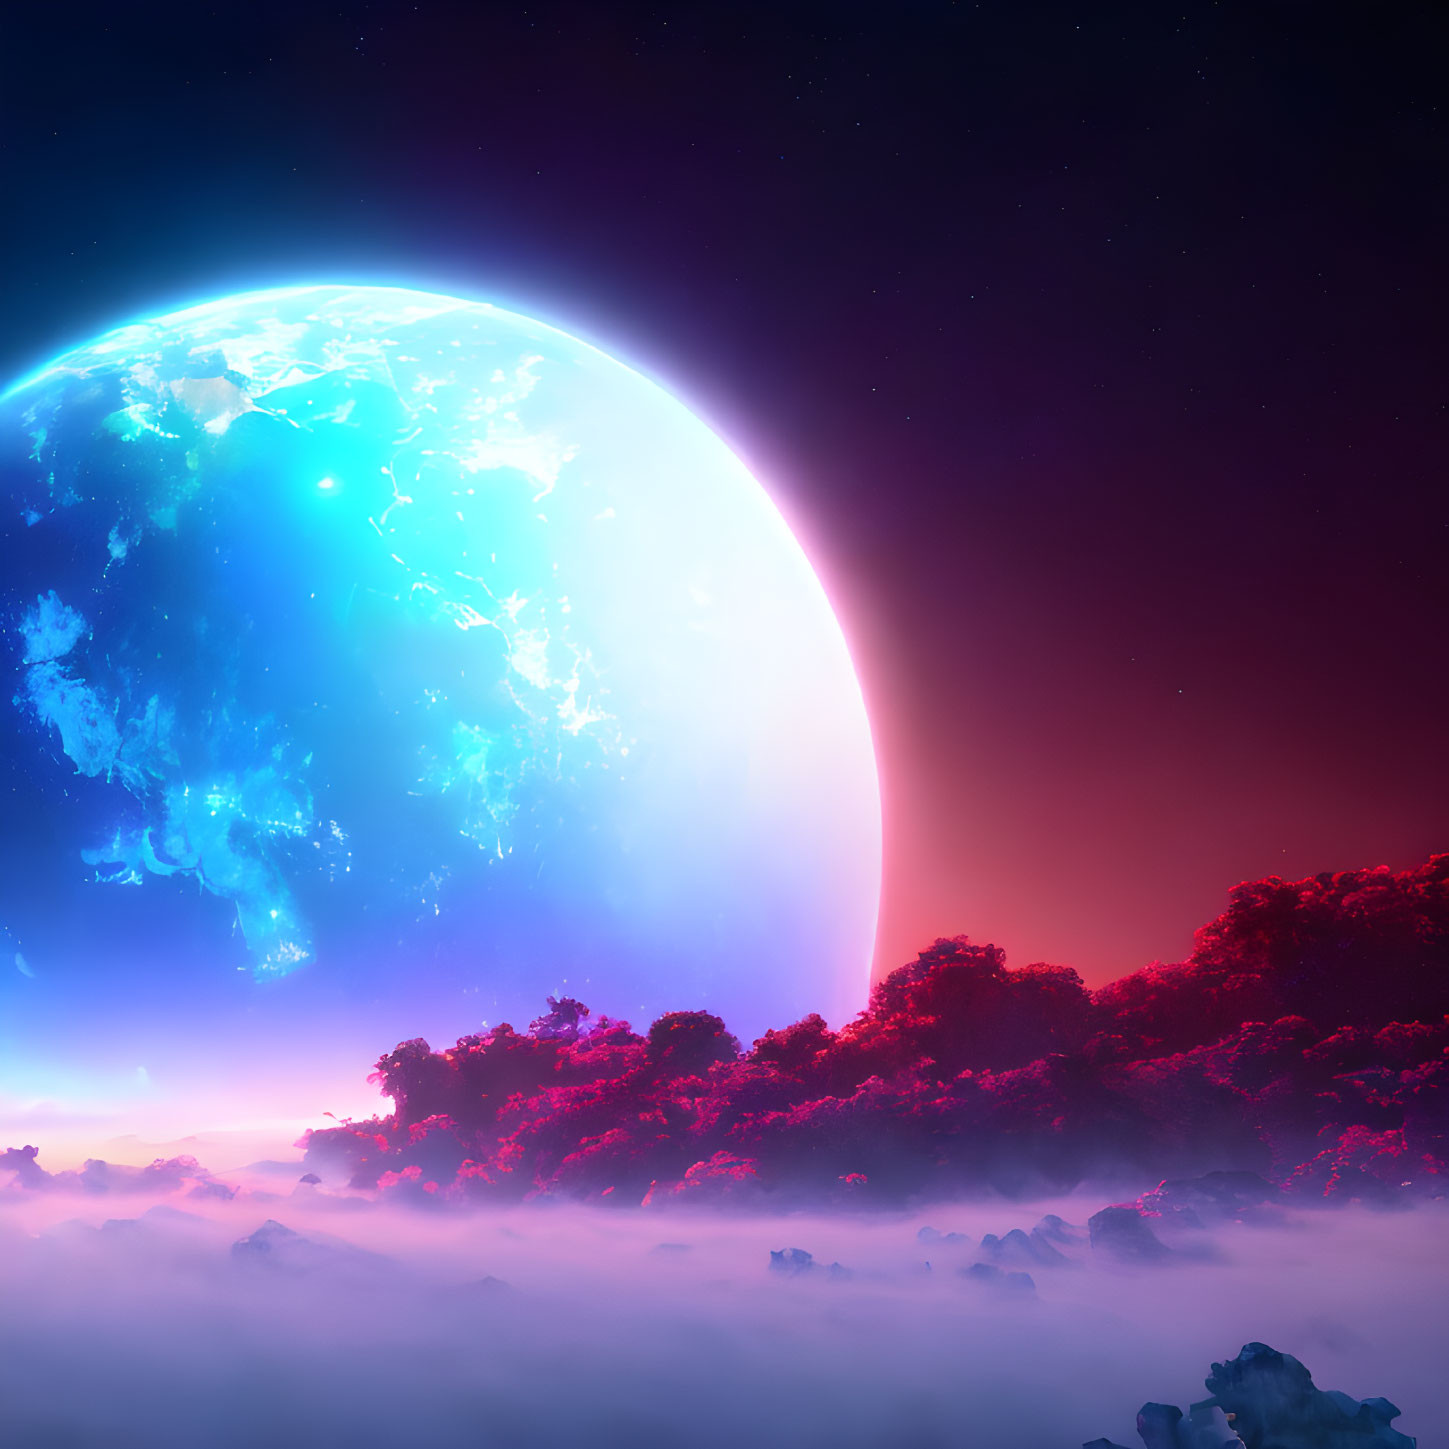 Luminous planet over misty forest in vibrant sci-fi landscape